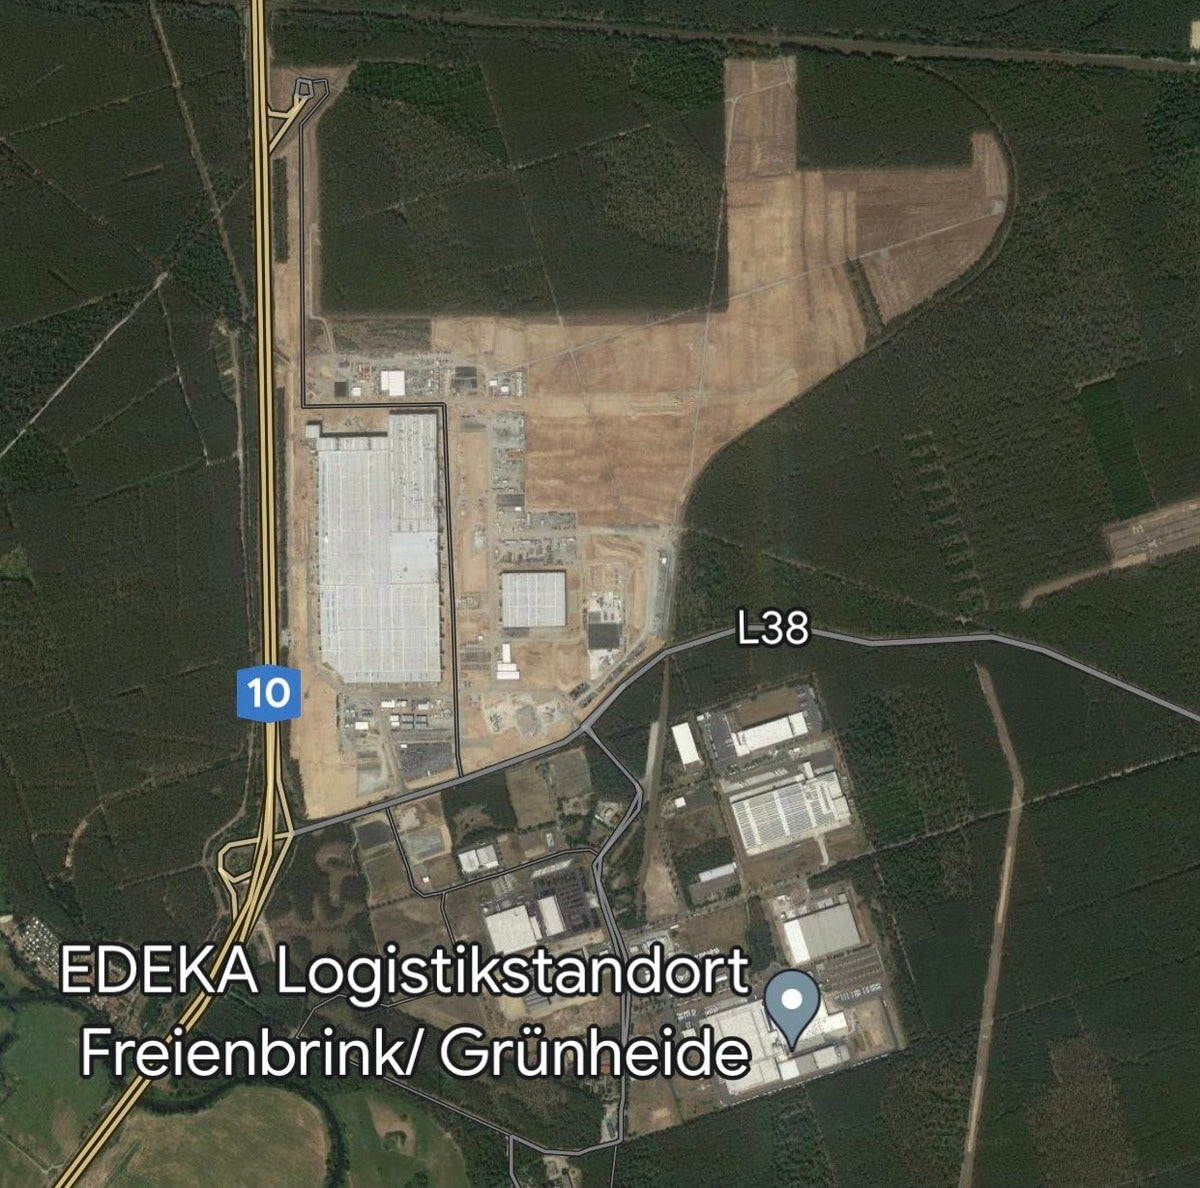 The Industrial Zone Where Tesla Giga Berlin Is Located Will Get its Own Wastewater Treatment Plant